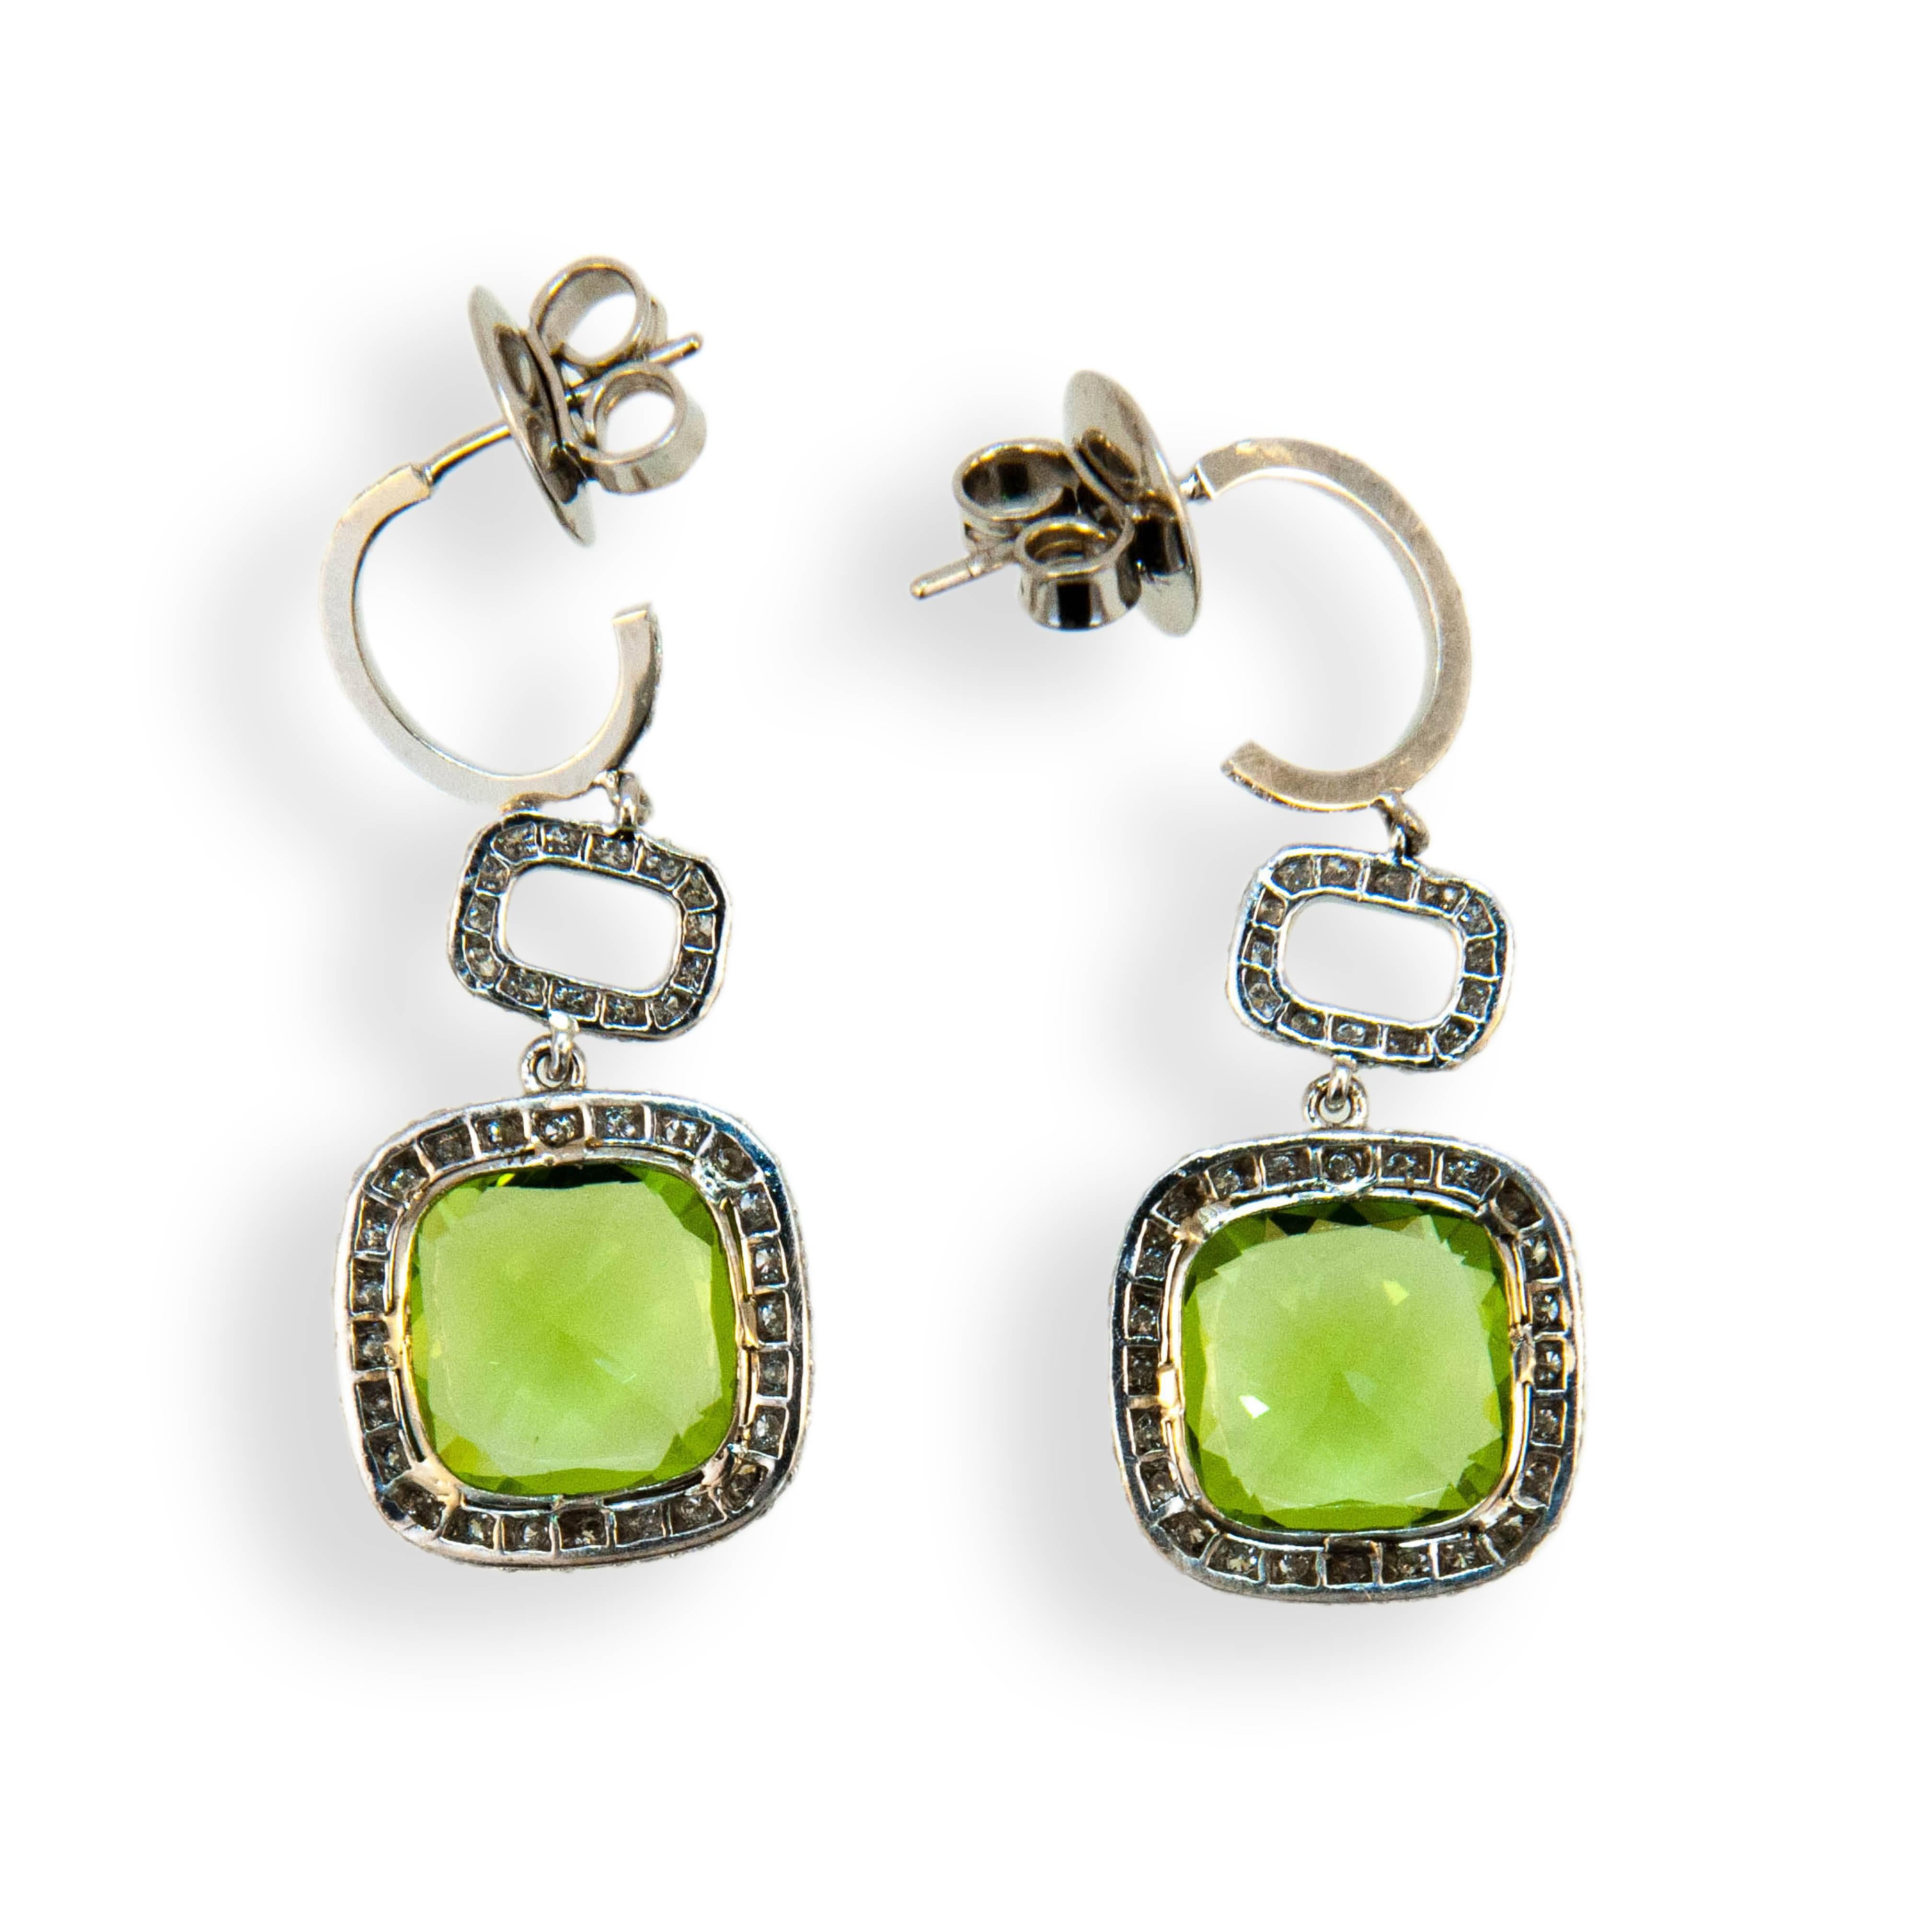 18 karat white gold earrings each set with one 10 x 10 mm cushion cut Peridot 3.36 carats and 3.66 carats. Set in each hoop are (18) diamonds .15 carat total weight. Surrounding Peridot and in connecting link are (85) diamonds 170 total